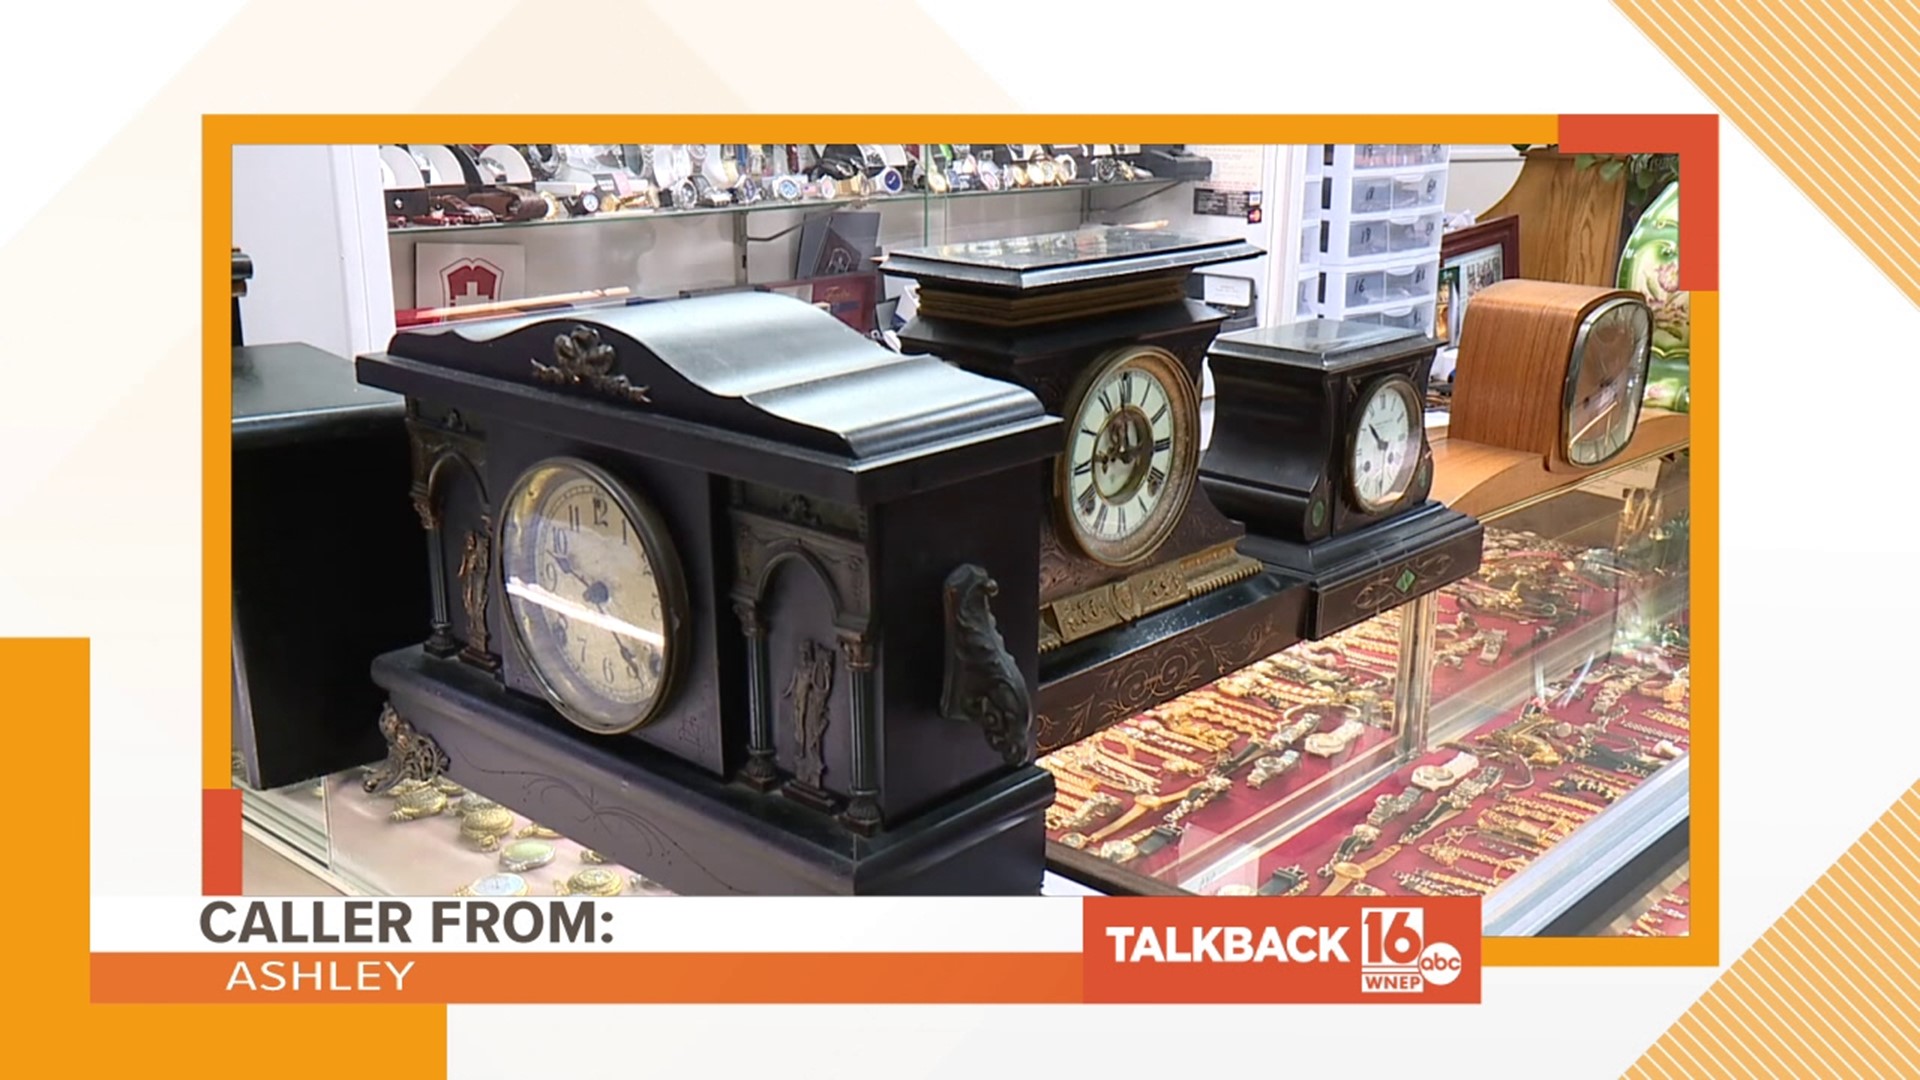 A caller from Ashley is commenting on the practice of turning the clocks back.